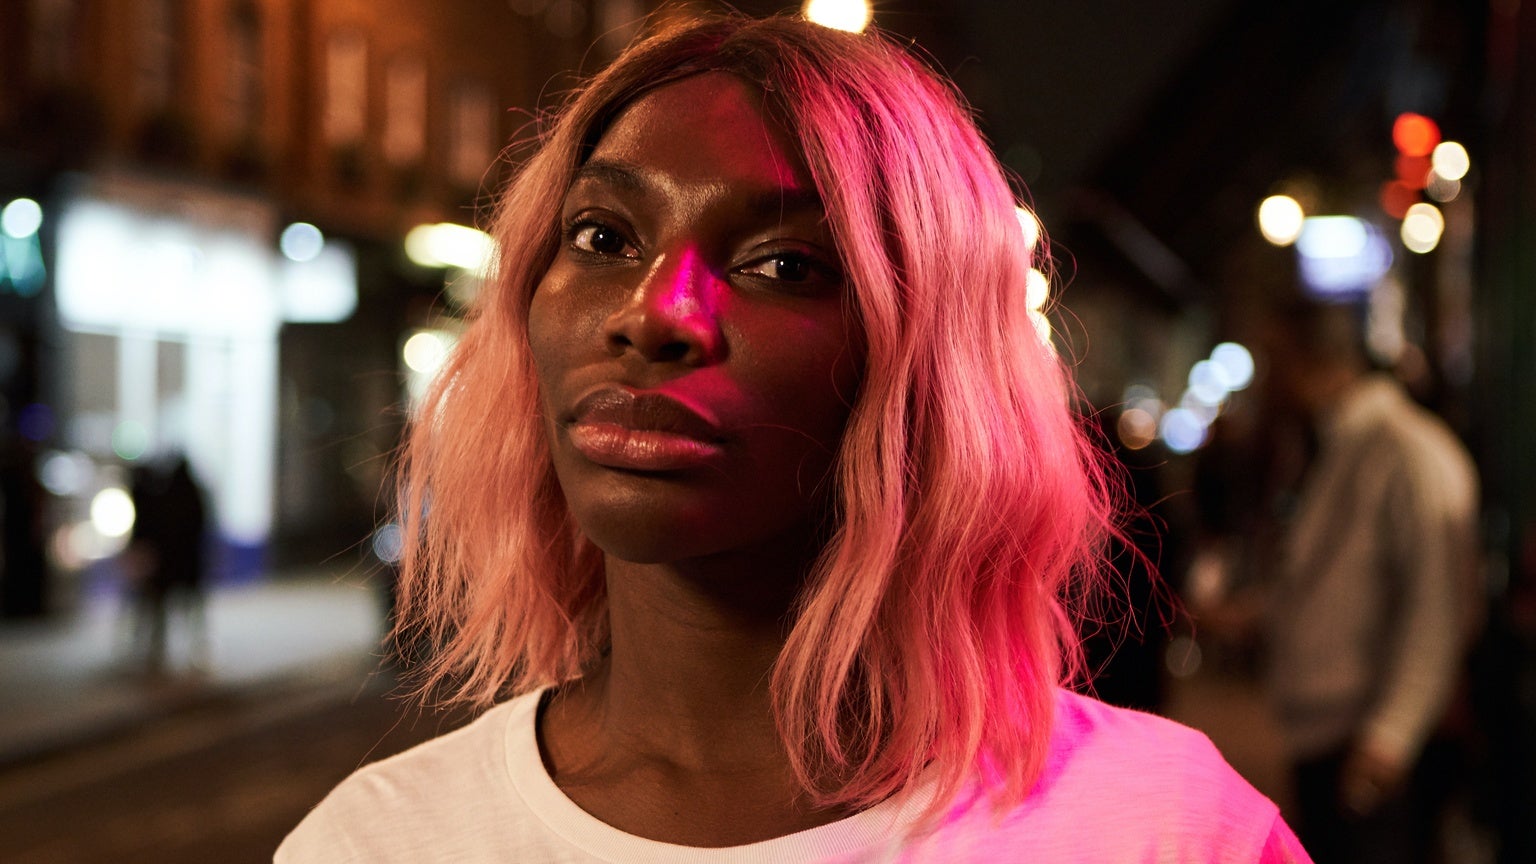 Michaela Coel Creates And Stars In Her Sexual Assault Inspired Series "I May Destroy You"